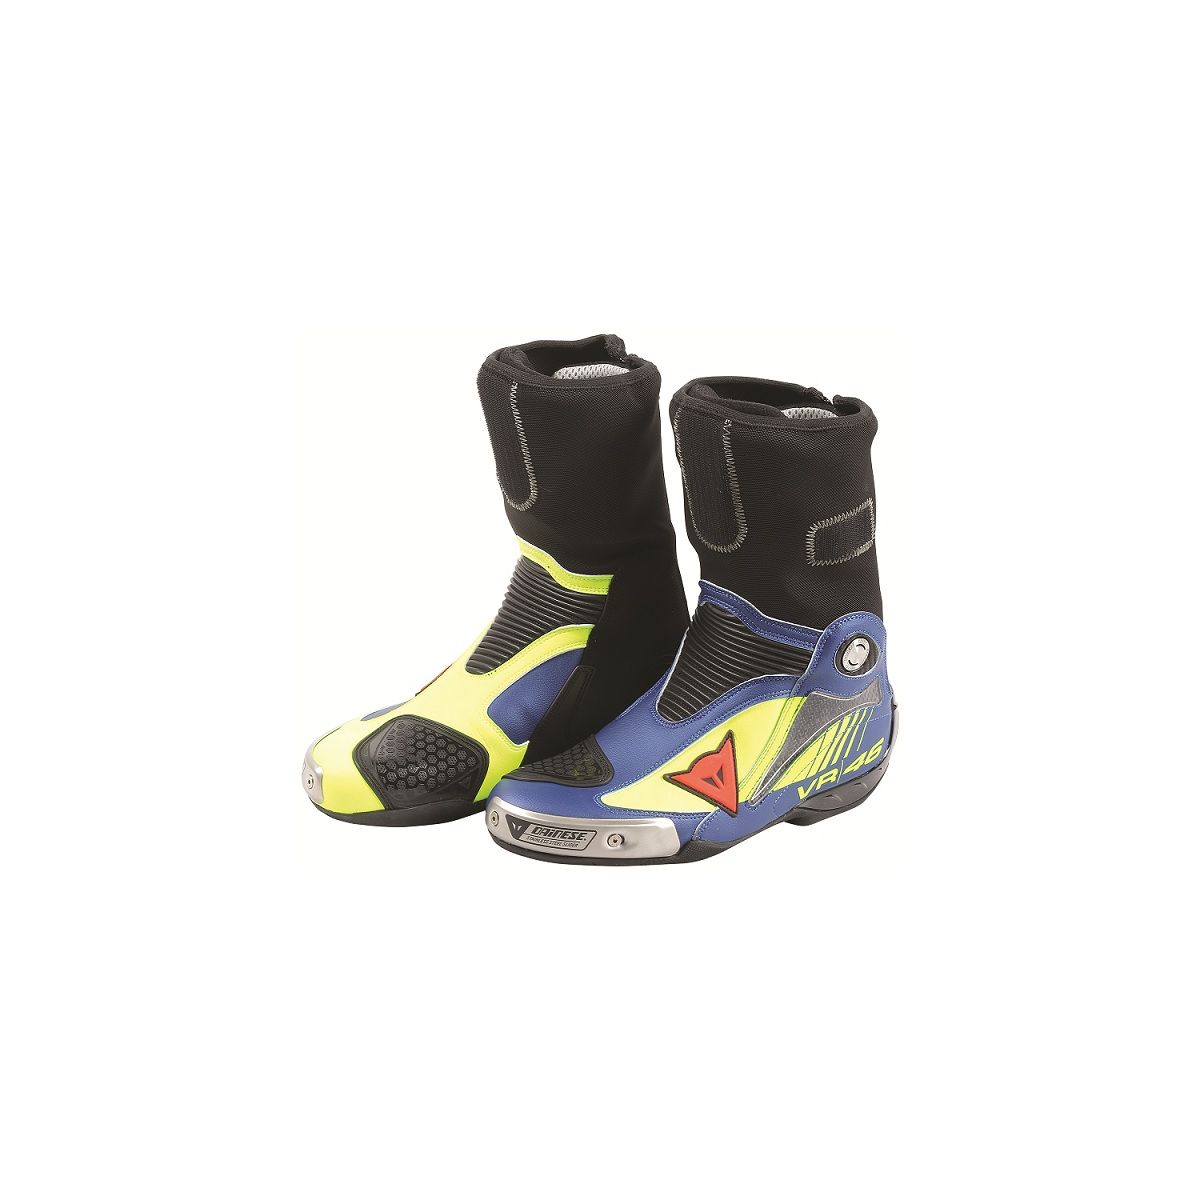 rossi dainese boots